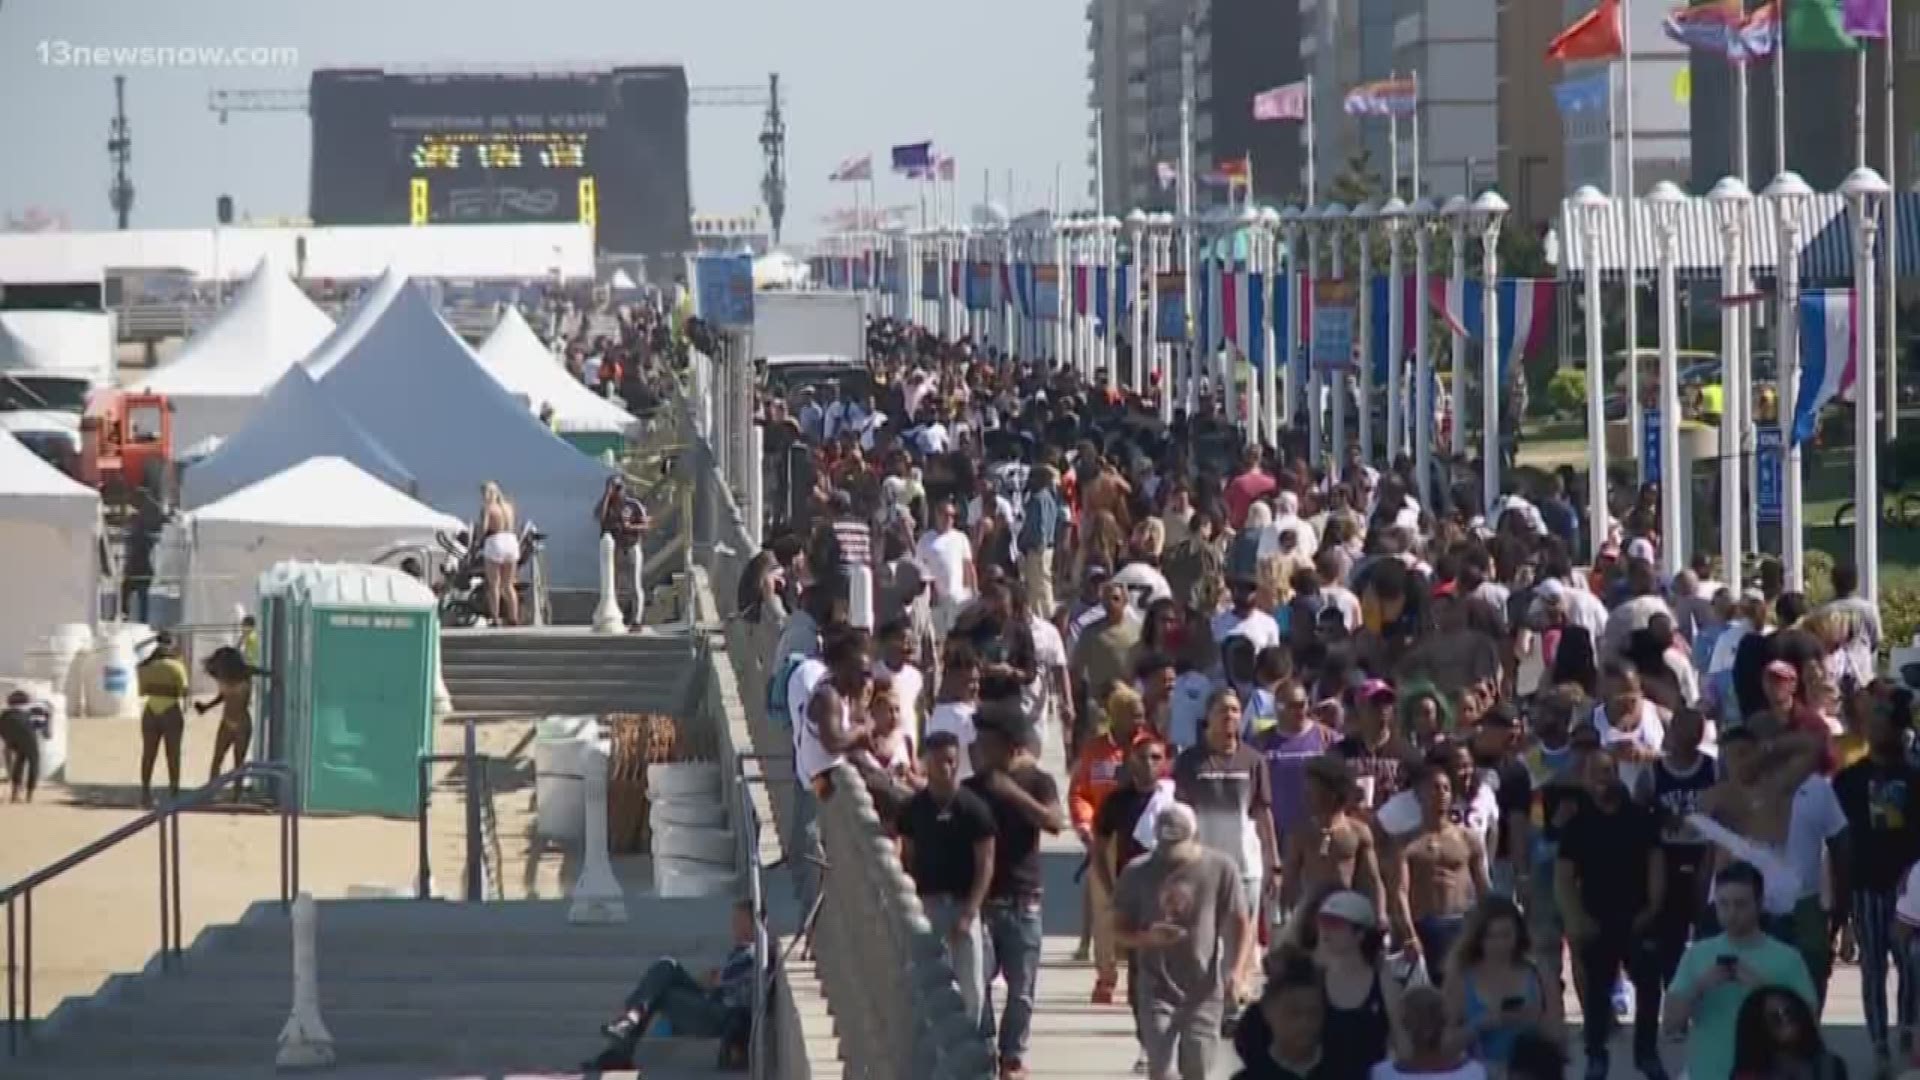 Oceanfront business owners said the increased police presence and organization made the festival a success.